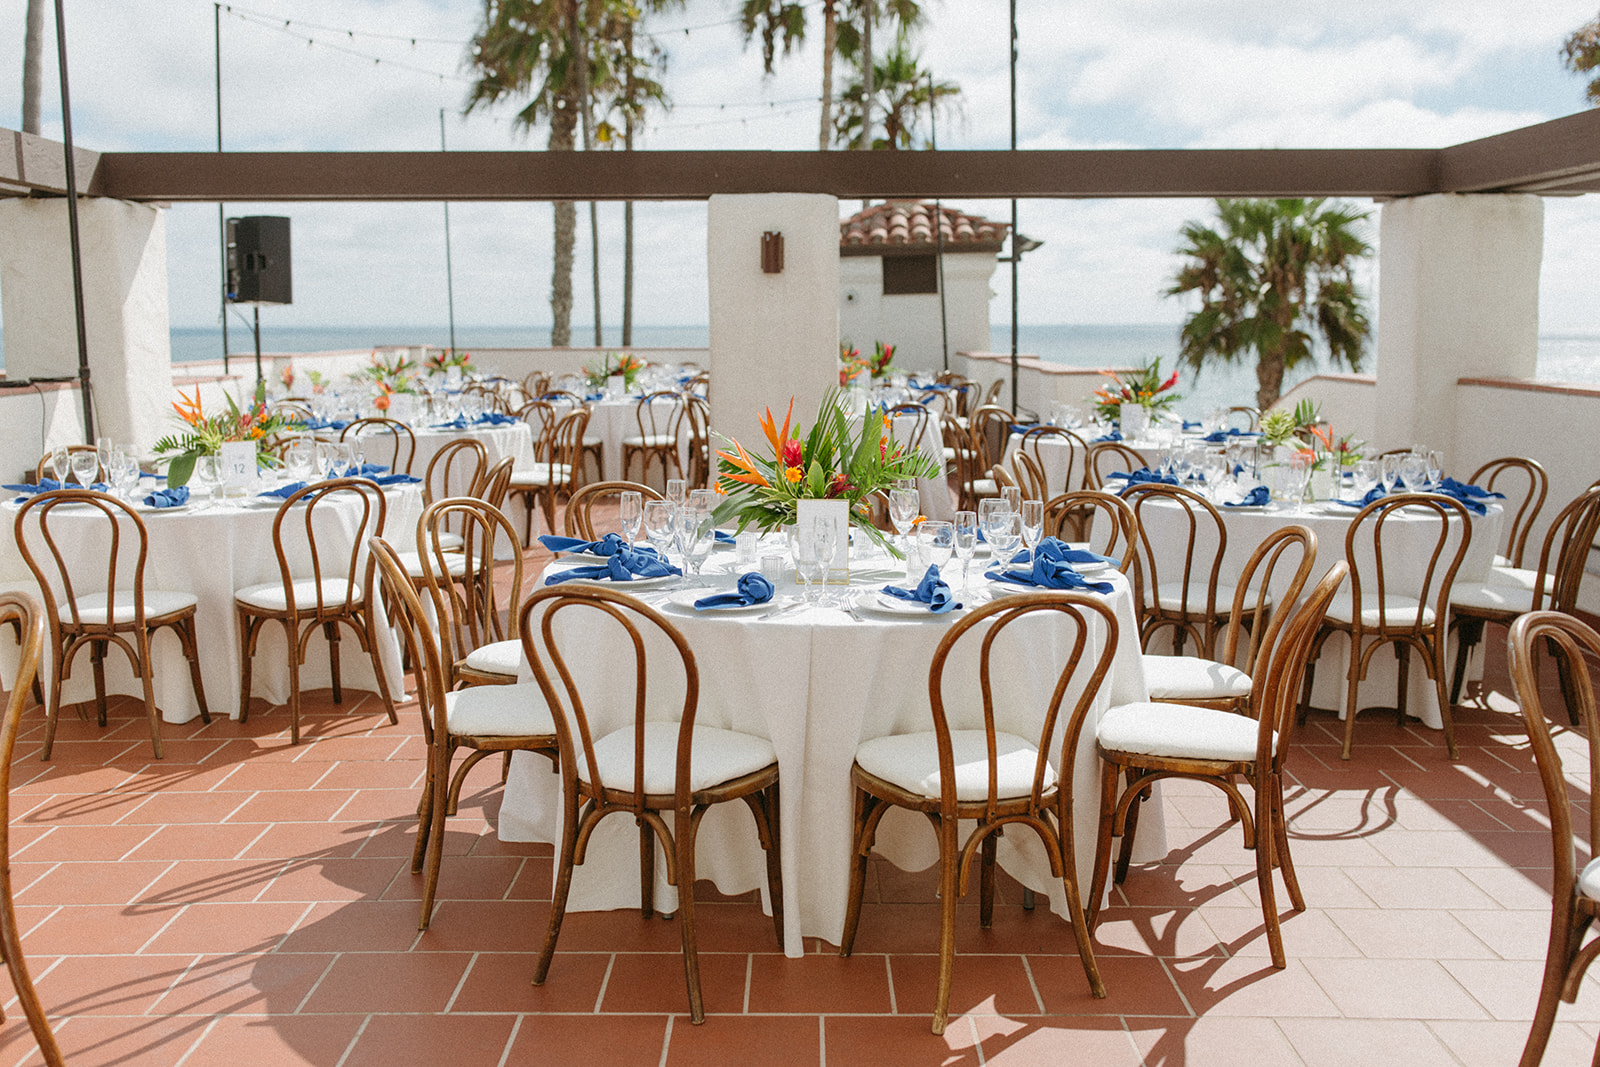 outdoor wedding reception at Ole Hanson Beach Club with wooden chairs and white linens, blue napkins and tropical floral table arrangements